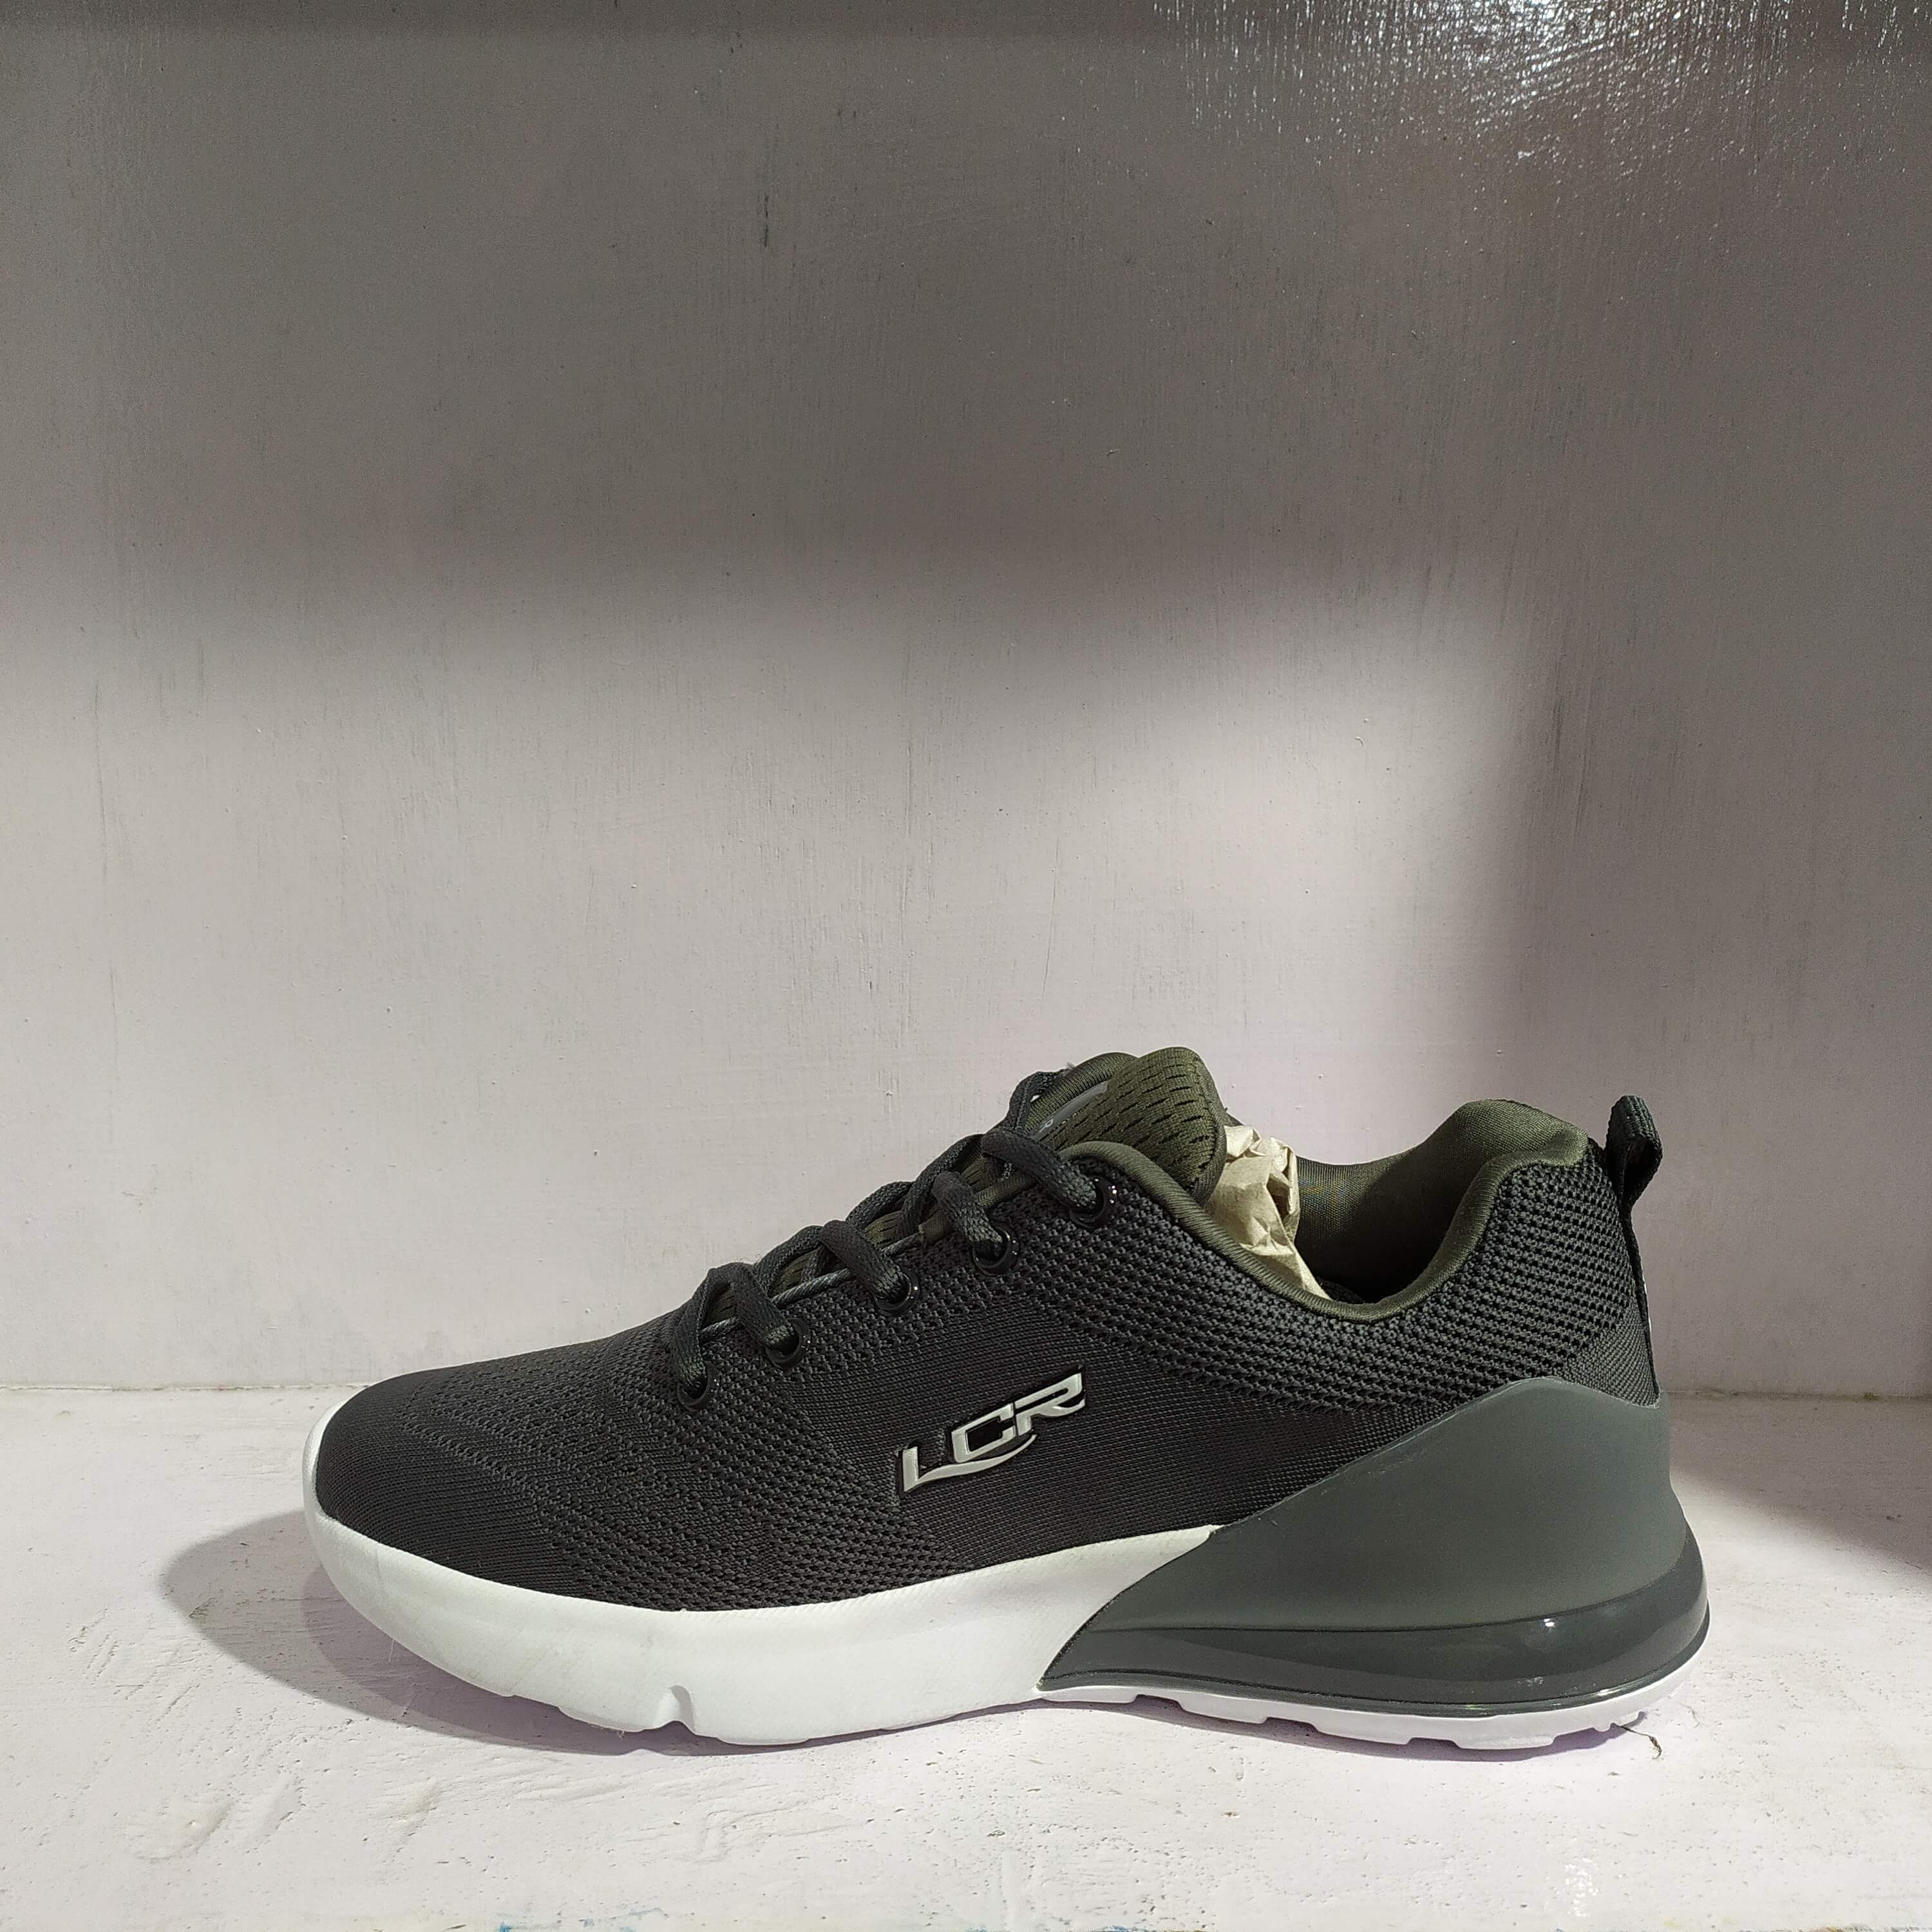 LCR SPORTS SHOES-totobed.com.vn